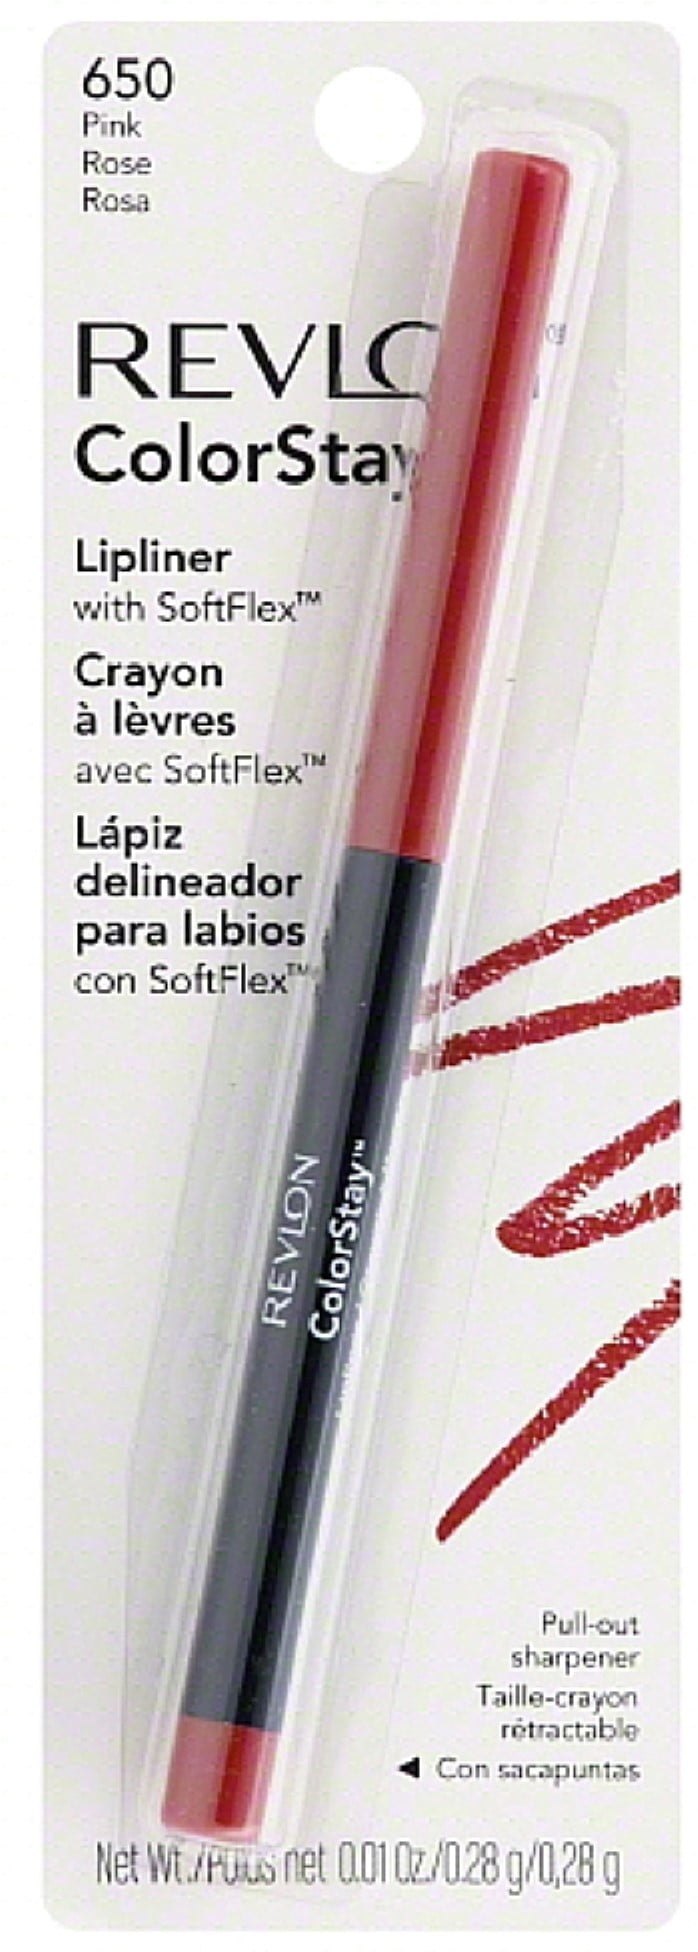 Revlon ColorStay Lip Liner with SoftFlex, Pink [650] 1 ea (Pack of